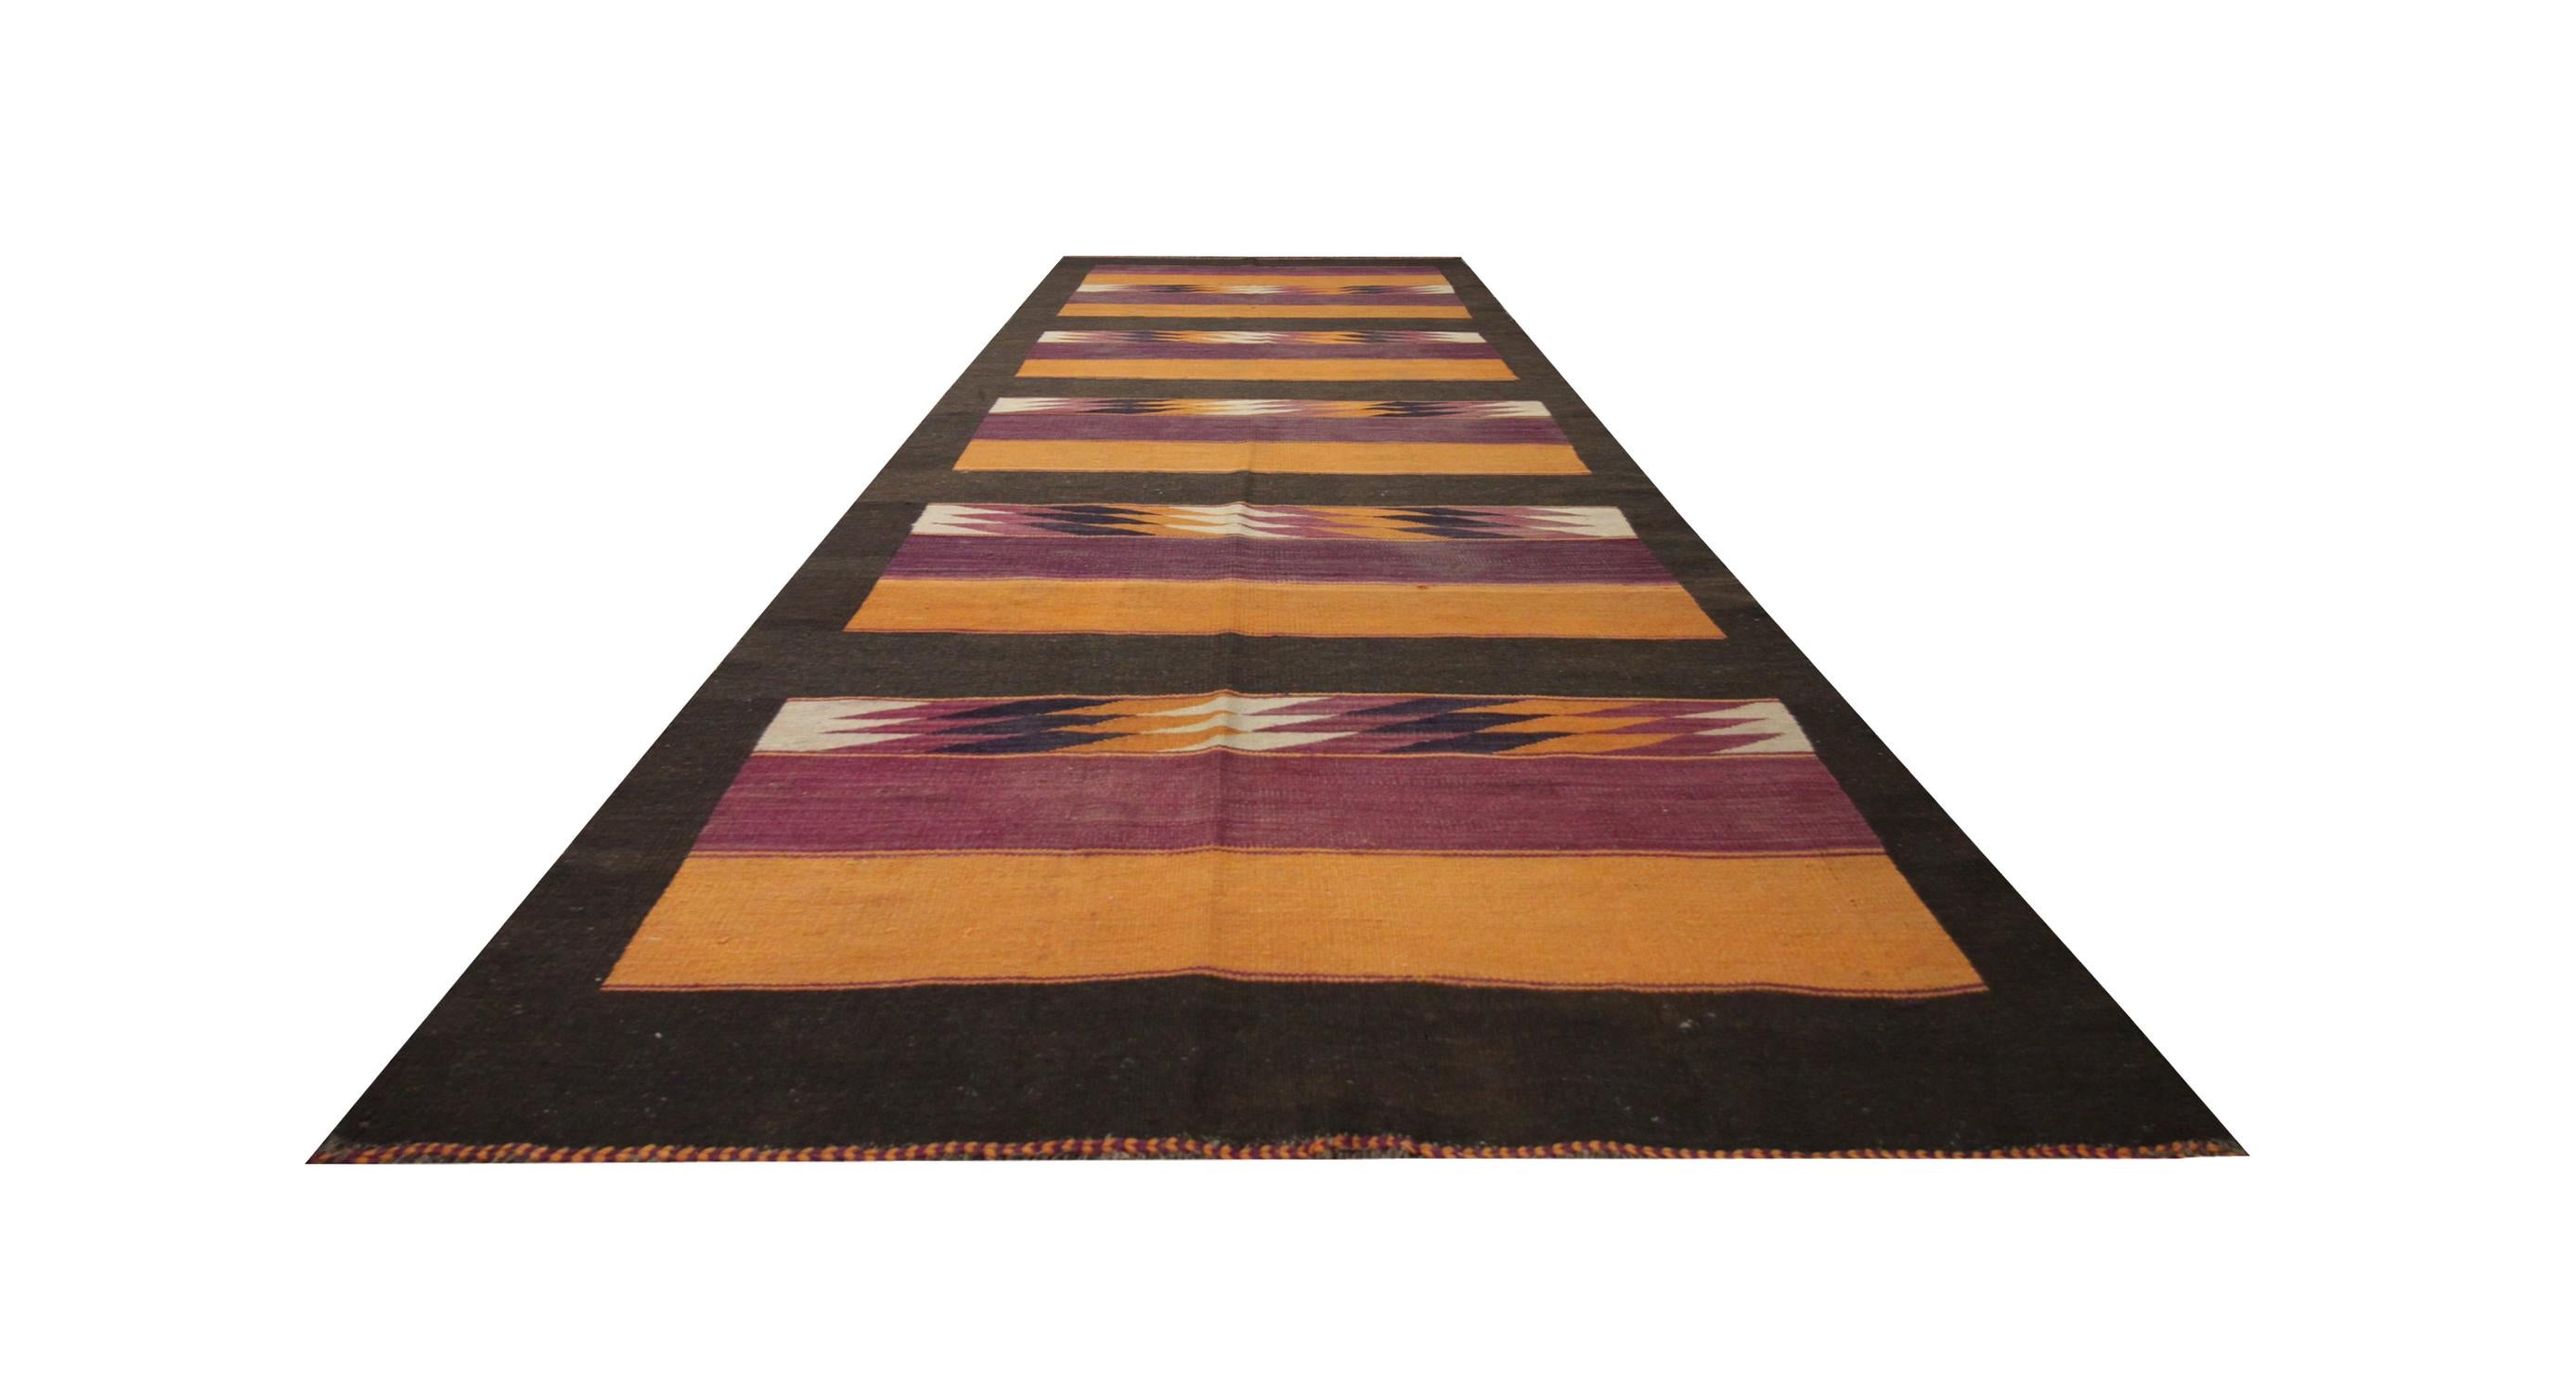 This kilim rug was woven by hand in the 1960s/70s with a simple stripe design and intertwined with purple, orange and brown accents in a repeating pattern. The colour palette and design make it easily matchable to both classic and contemporary home